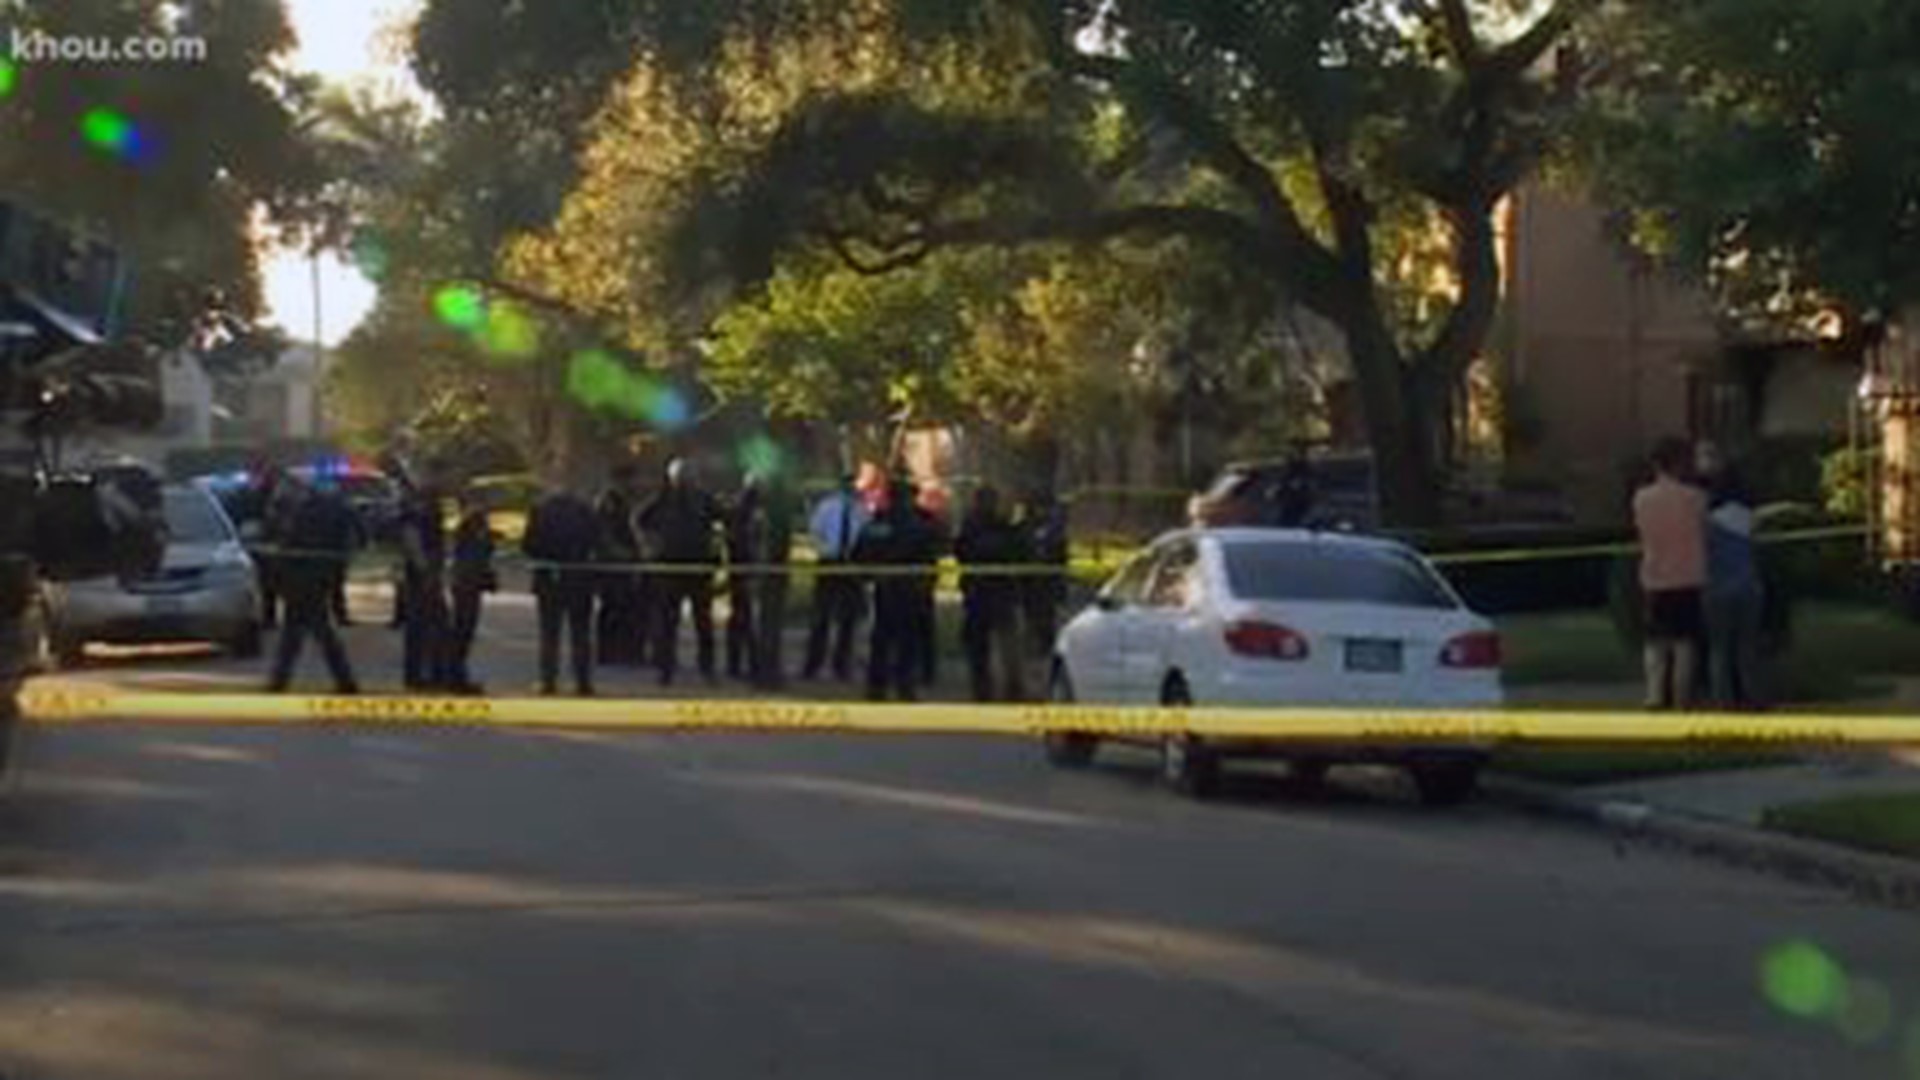 Houston police said a man may be responsible for shooting four of his family members before turning the gun on himself at a home in west Houston.